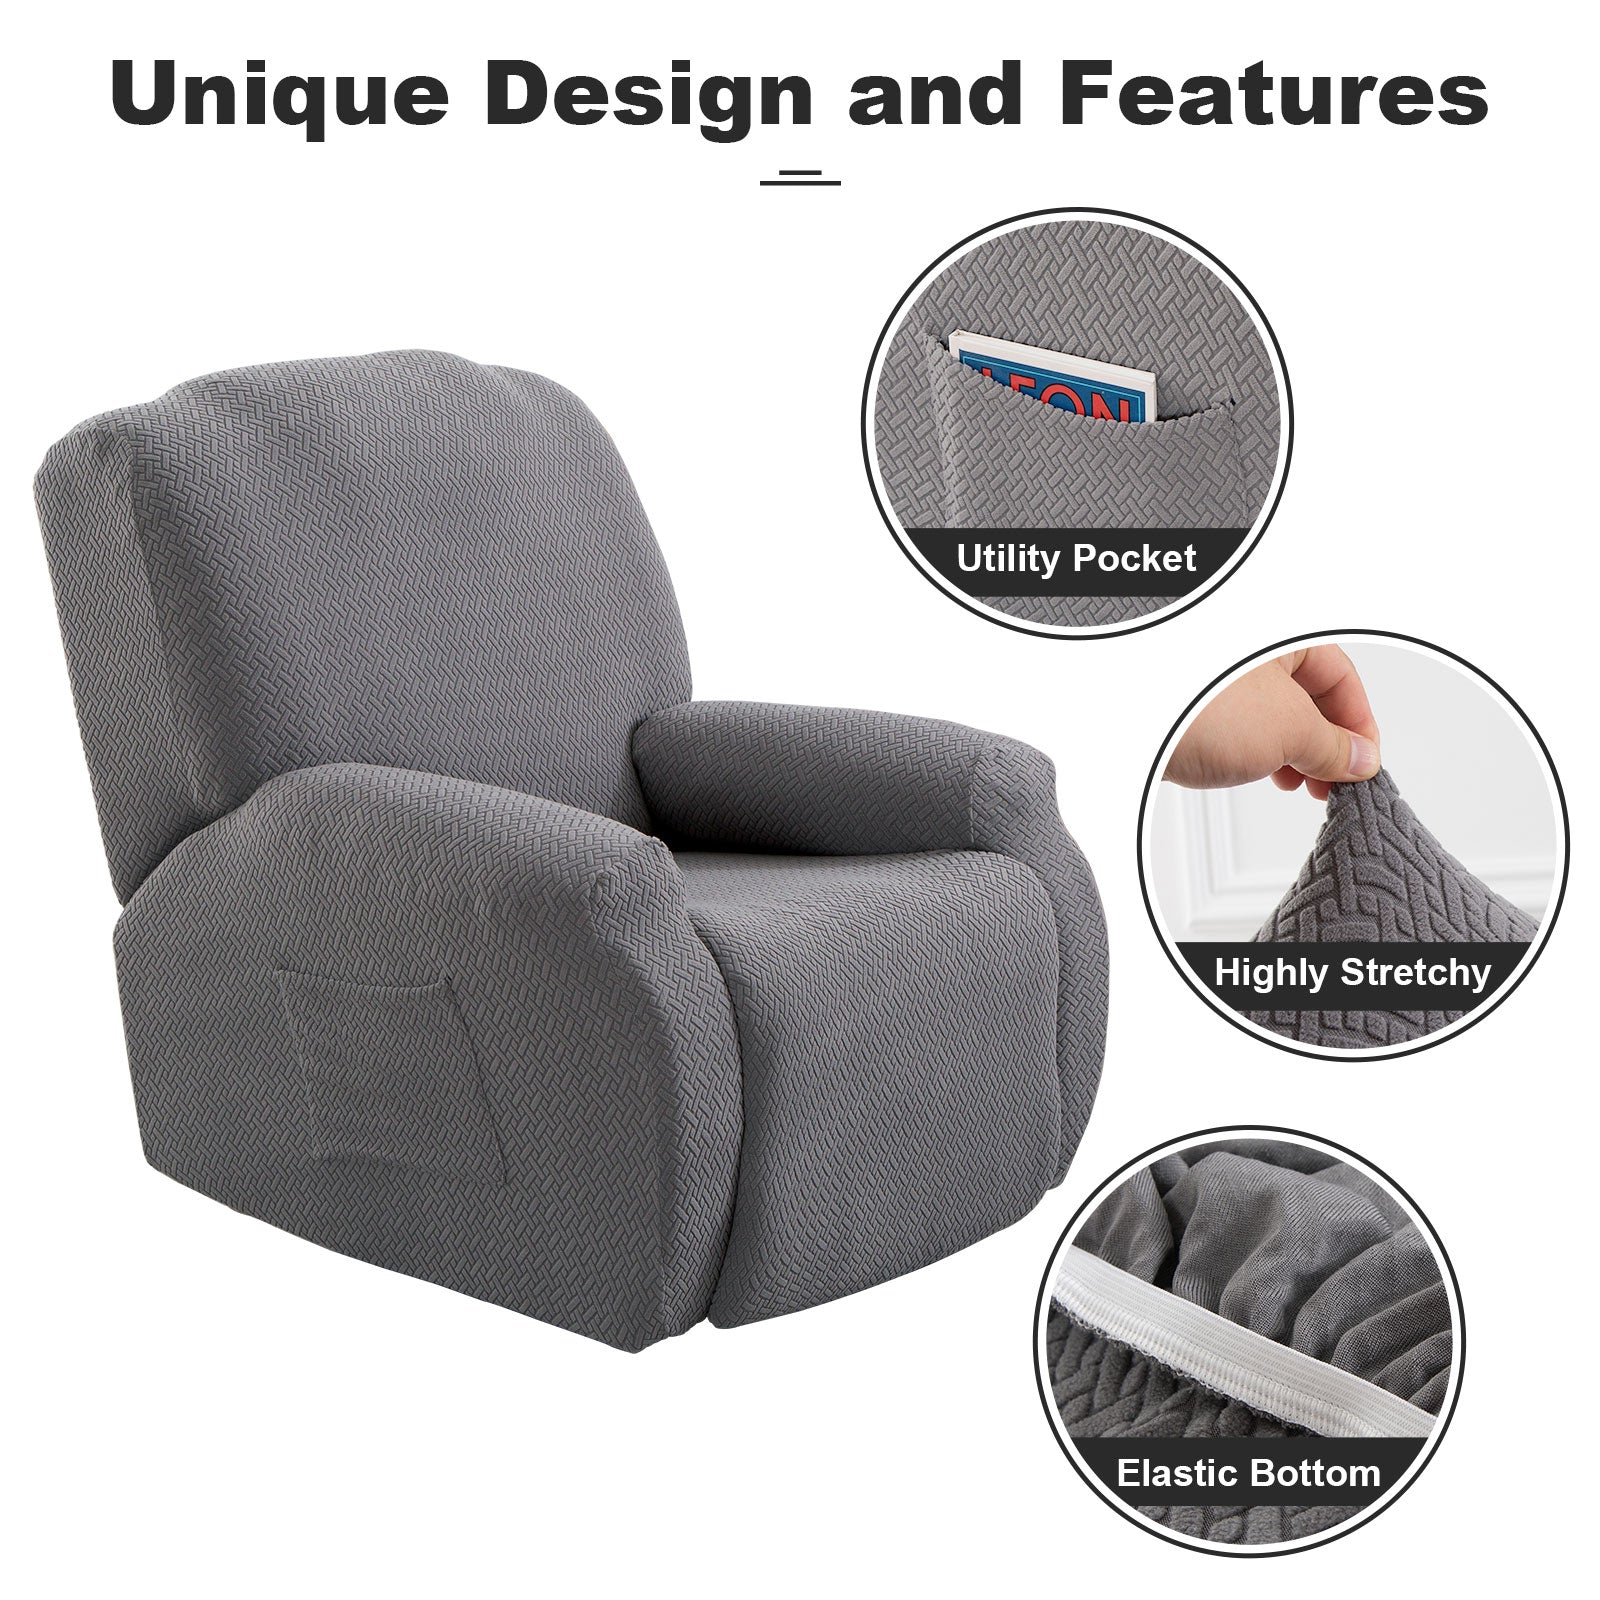 4 Pieces Stretch Recliner Chair Cover Easy-Going With side pockets Waterproof non-slip advanced fabric,6 color